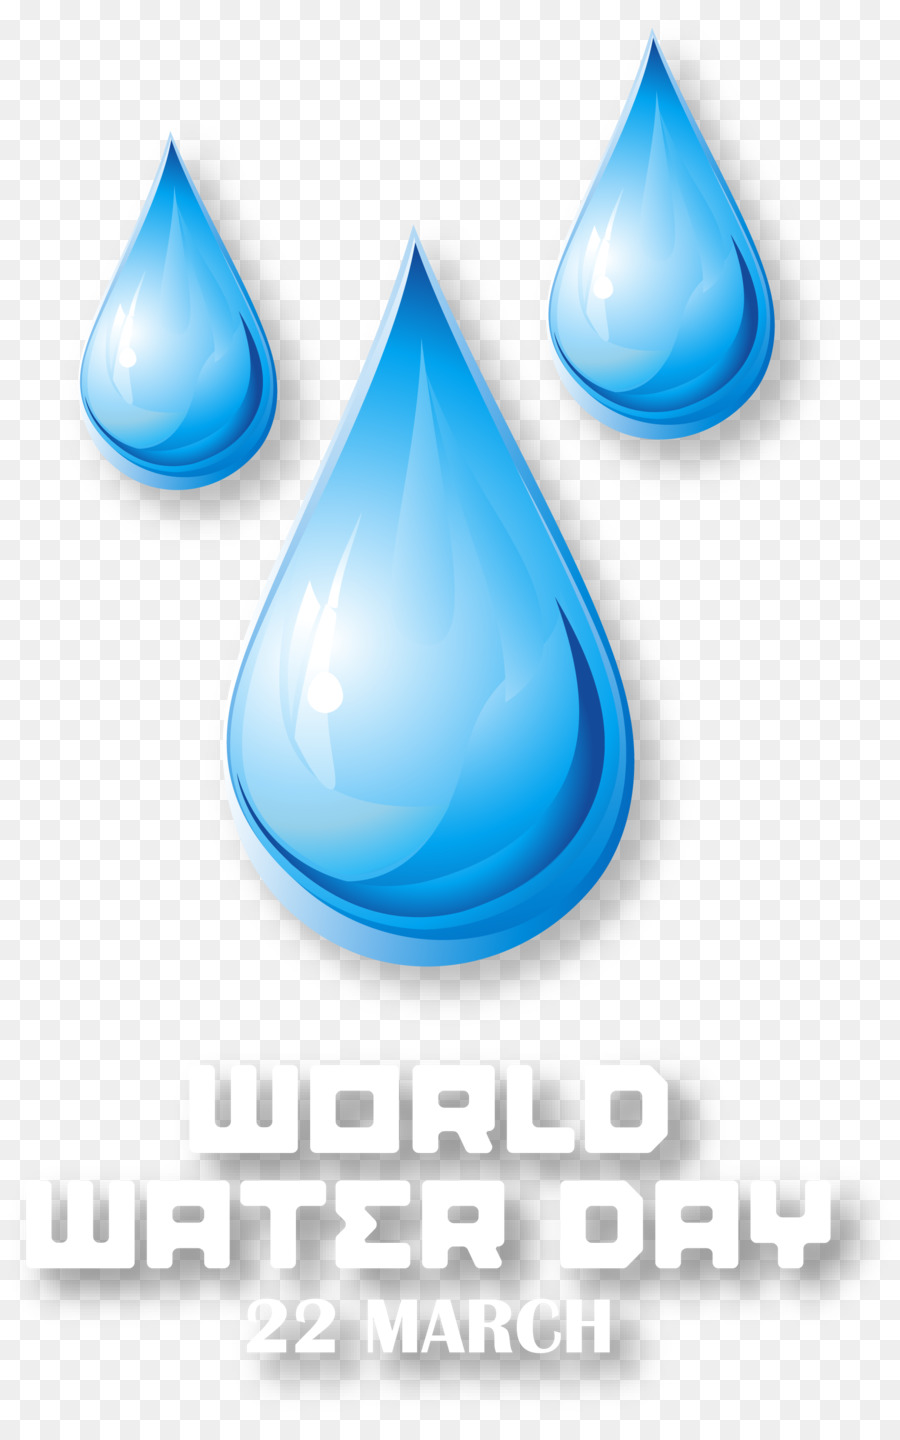 Water Drop Euclidean vector - Vector hand painted water droplets png download - 1773*2806 - Free Transparent Water png Download.